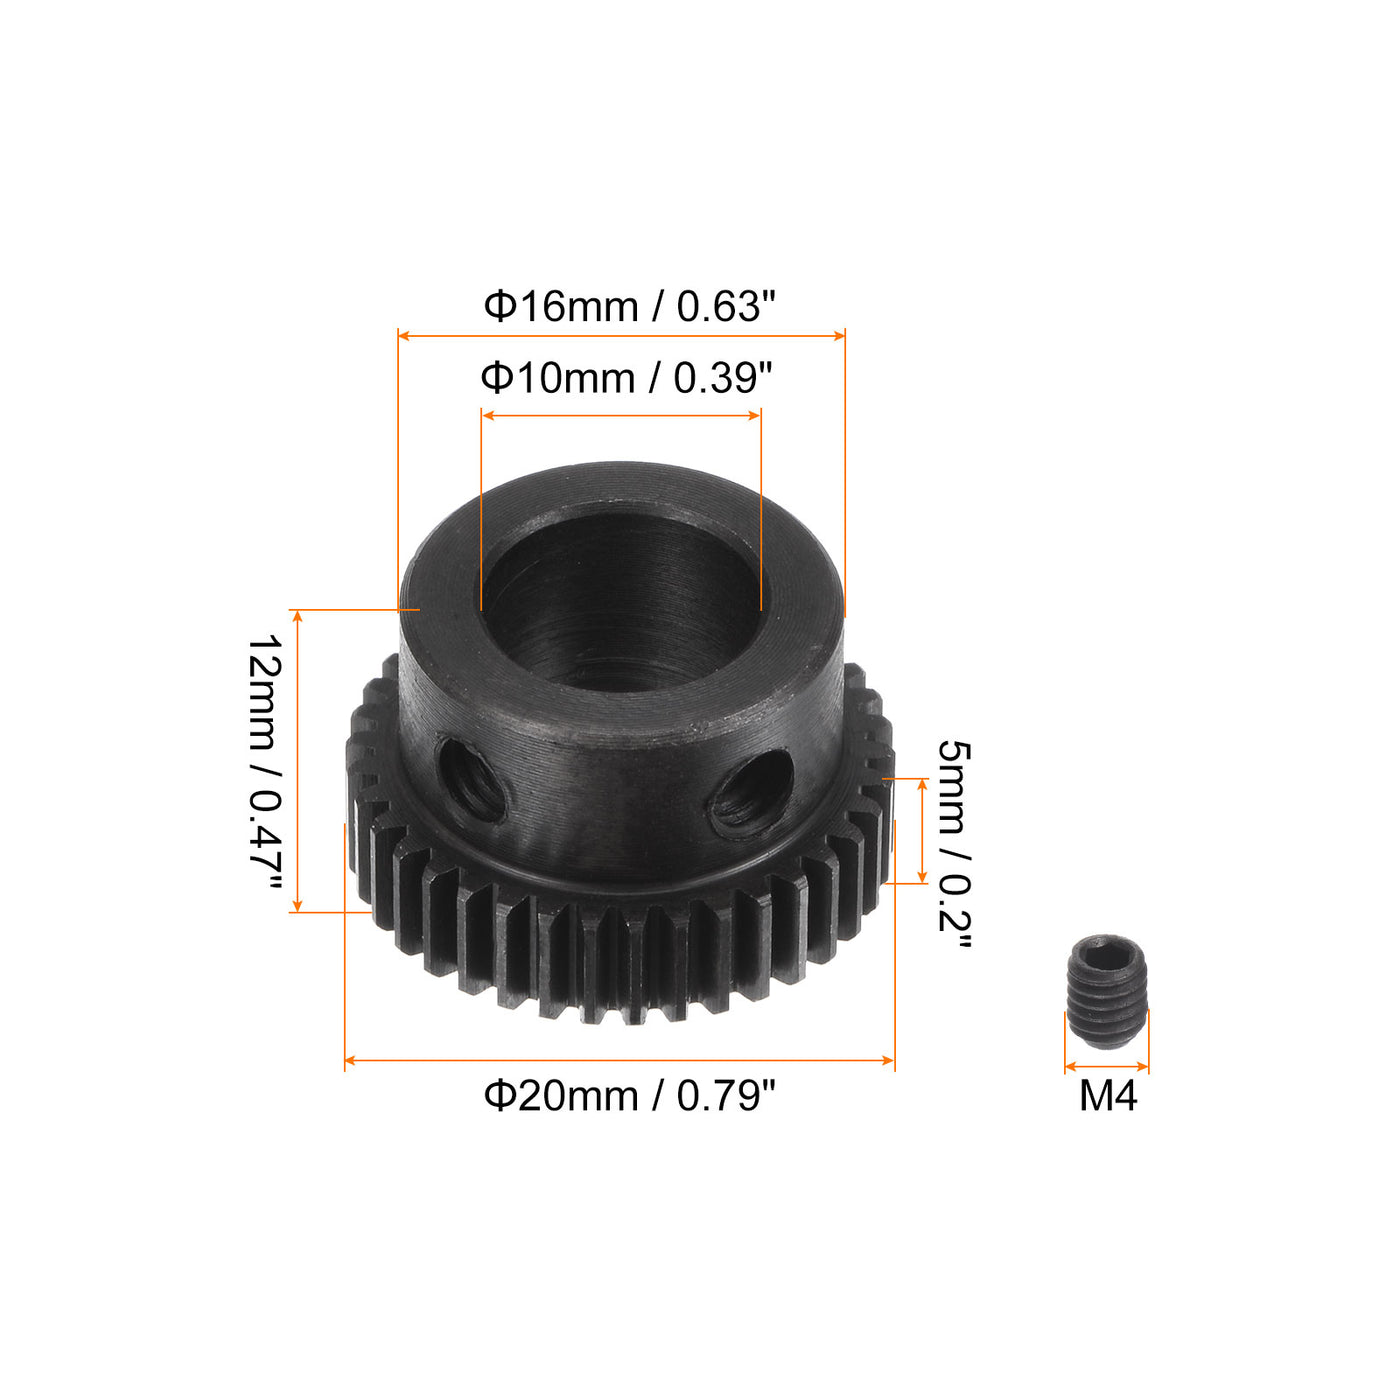 uxcell Uxcell 0.5 Mod 38T 10mm Bore 20mm Outer Dia 45# Carbon Steel Motor Pinion Gear Set